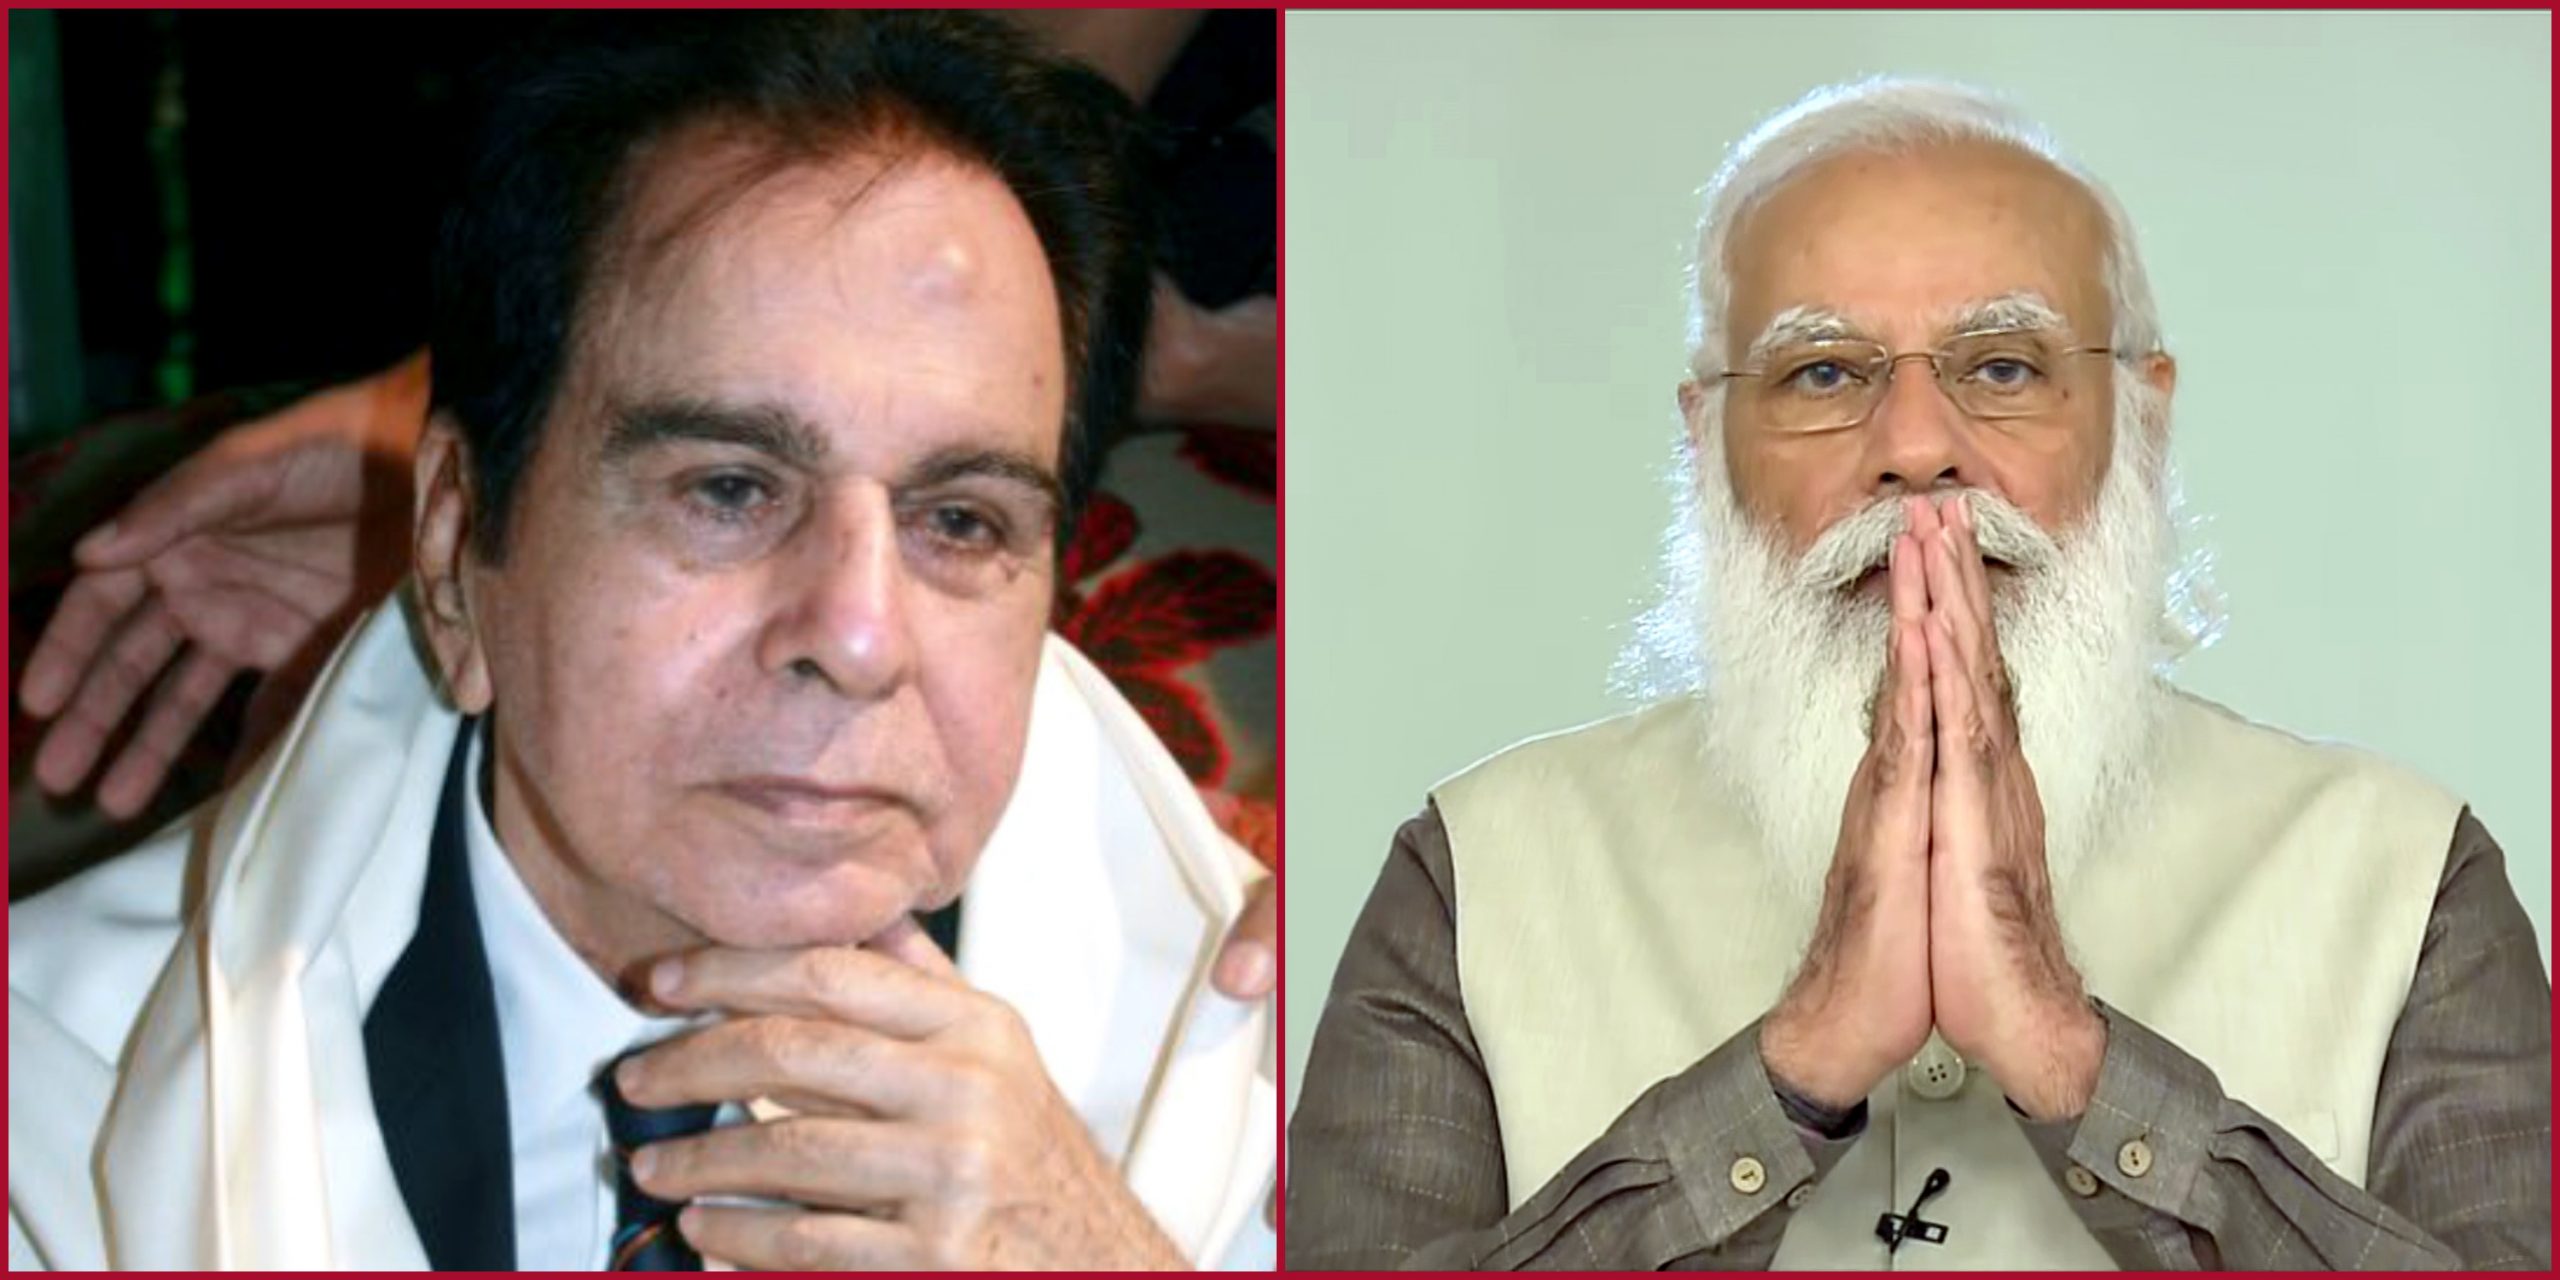 Dilip Kumar dies at 98: PM Modi condoles his demise, says he will be remembered as a cinematic legend